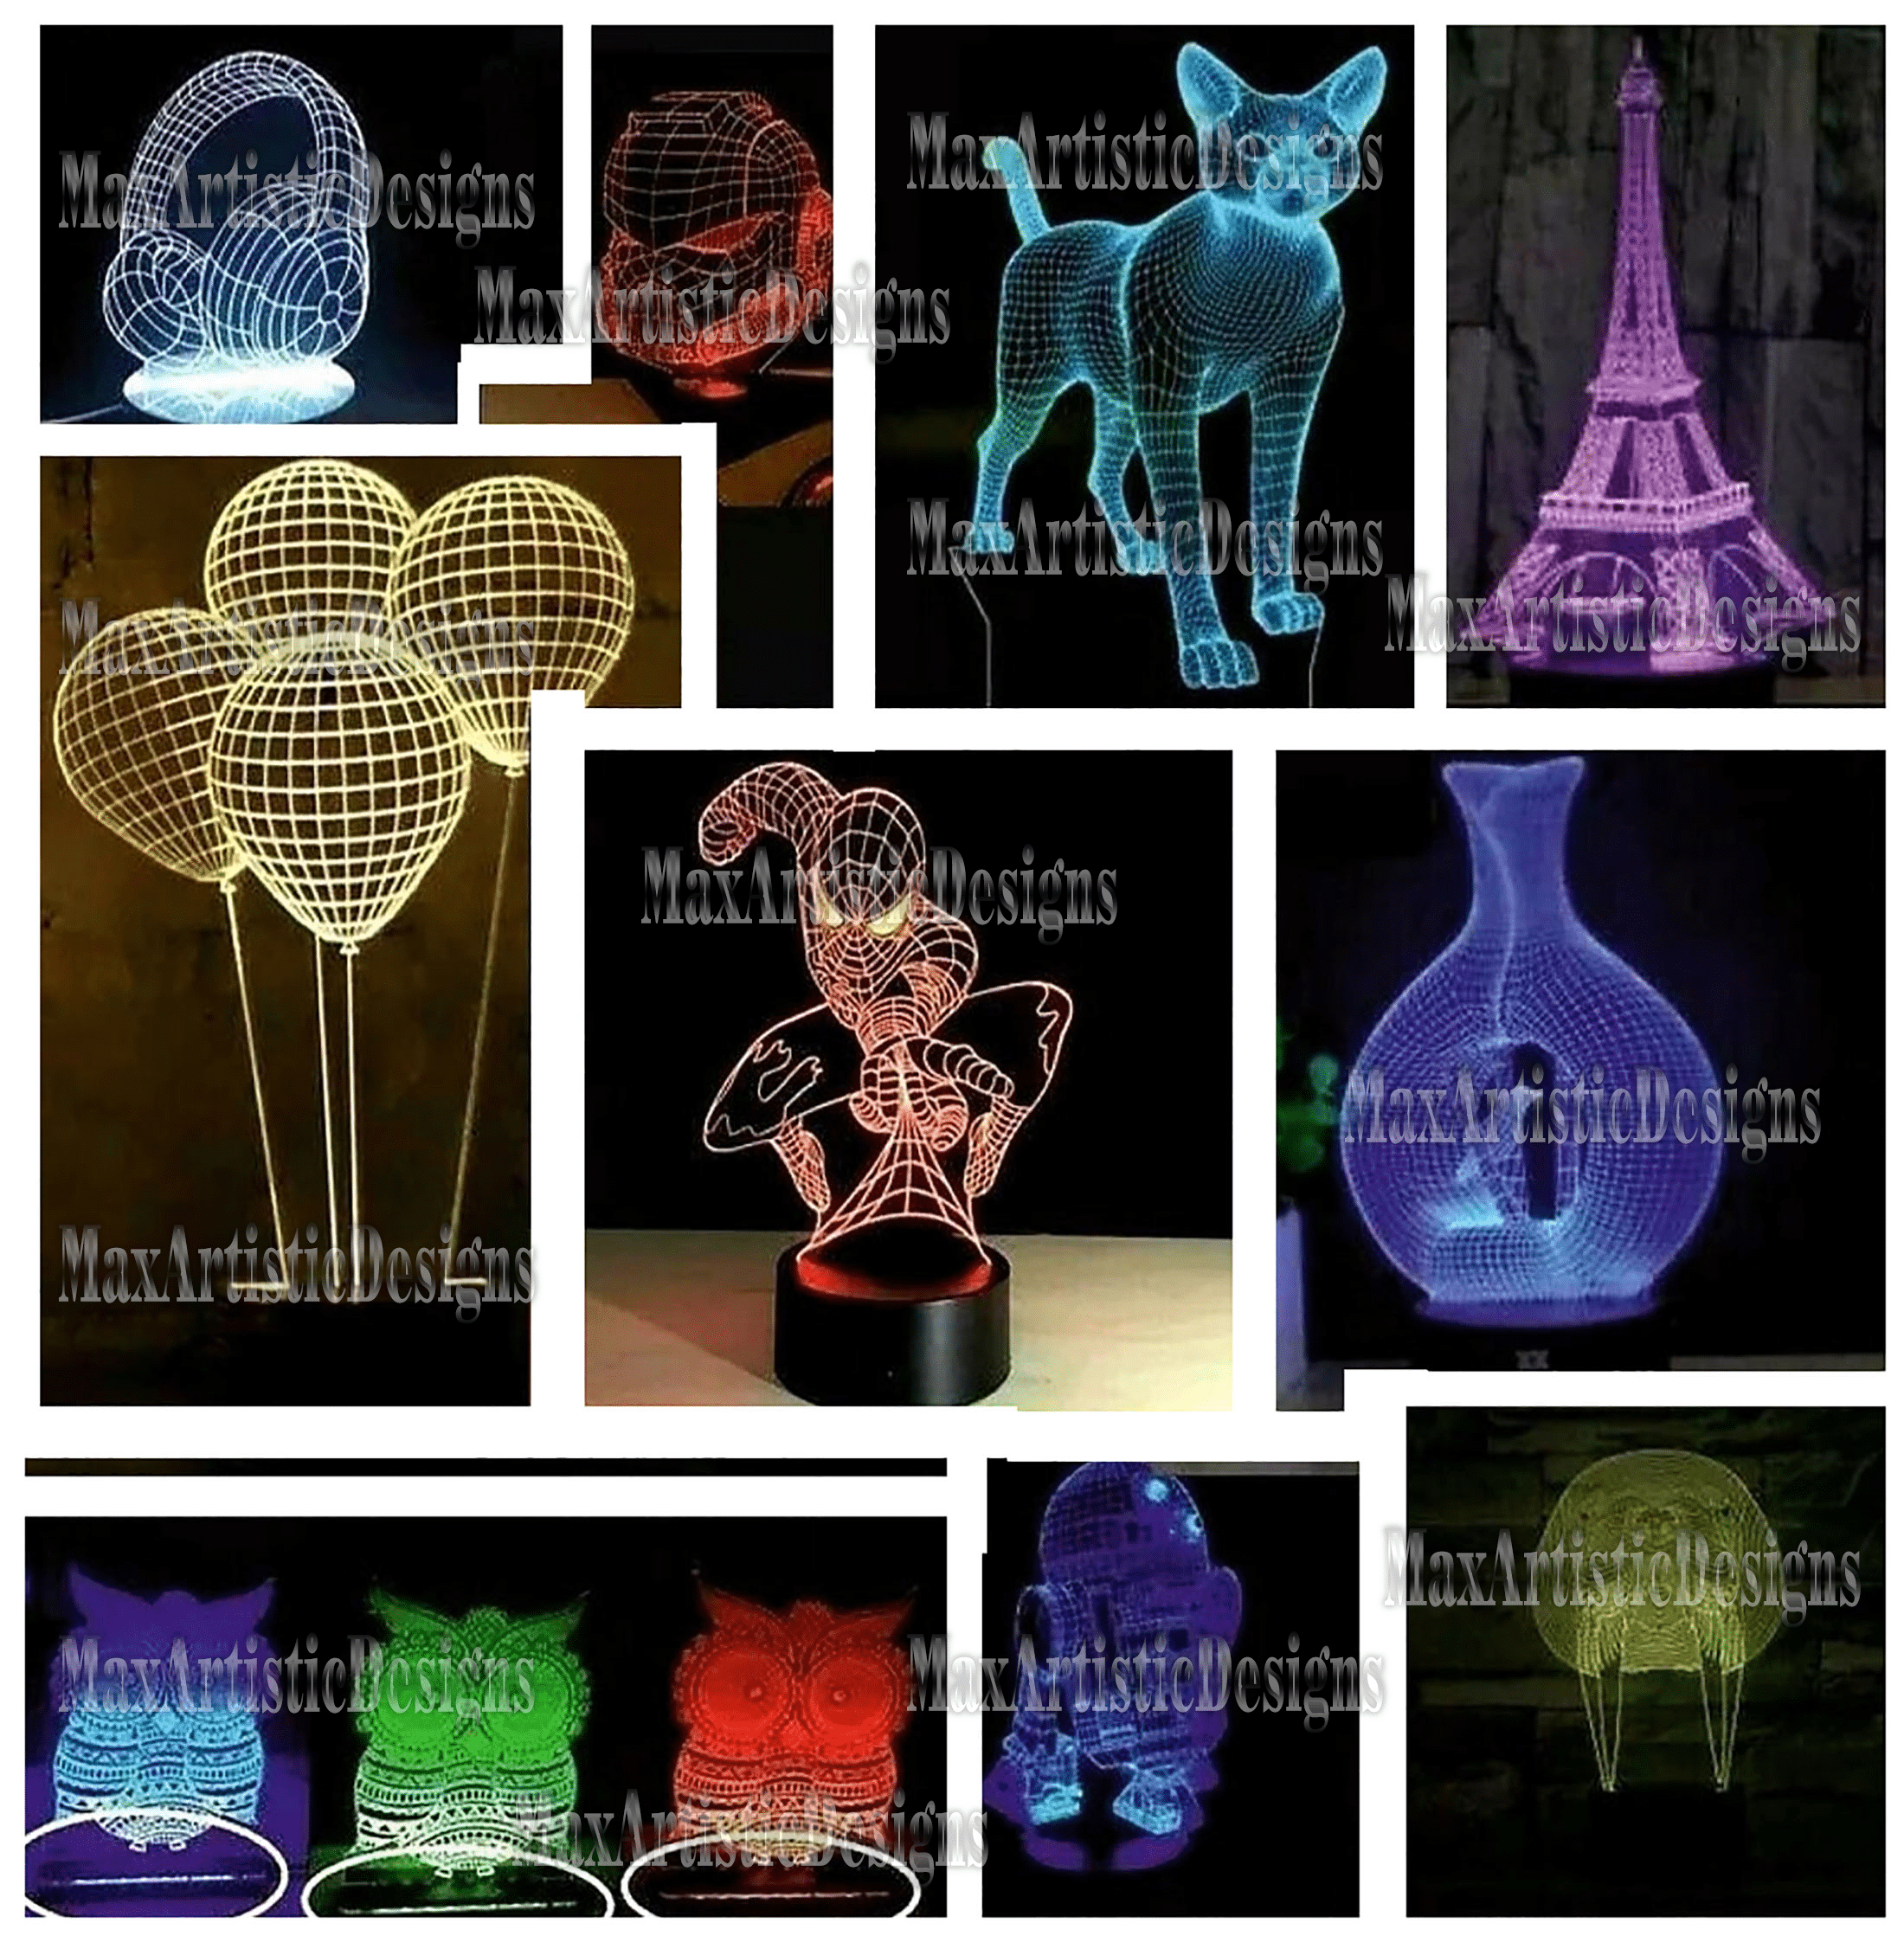 50+ cnc vectors for 3d acrylic illusionist led lamps in pdf dxf jpg file formats for cnc and laser cut machine